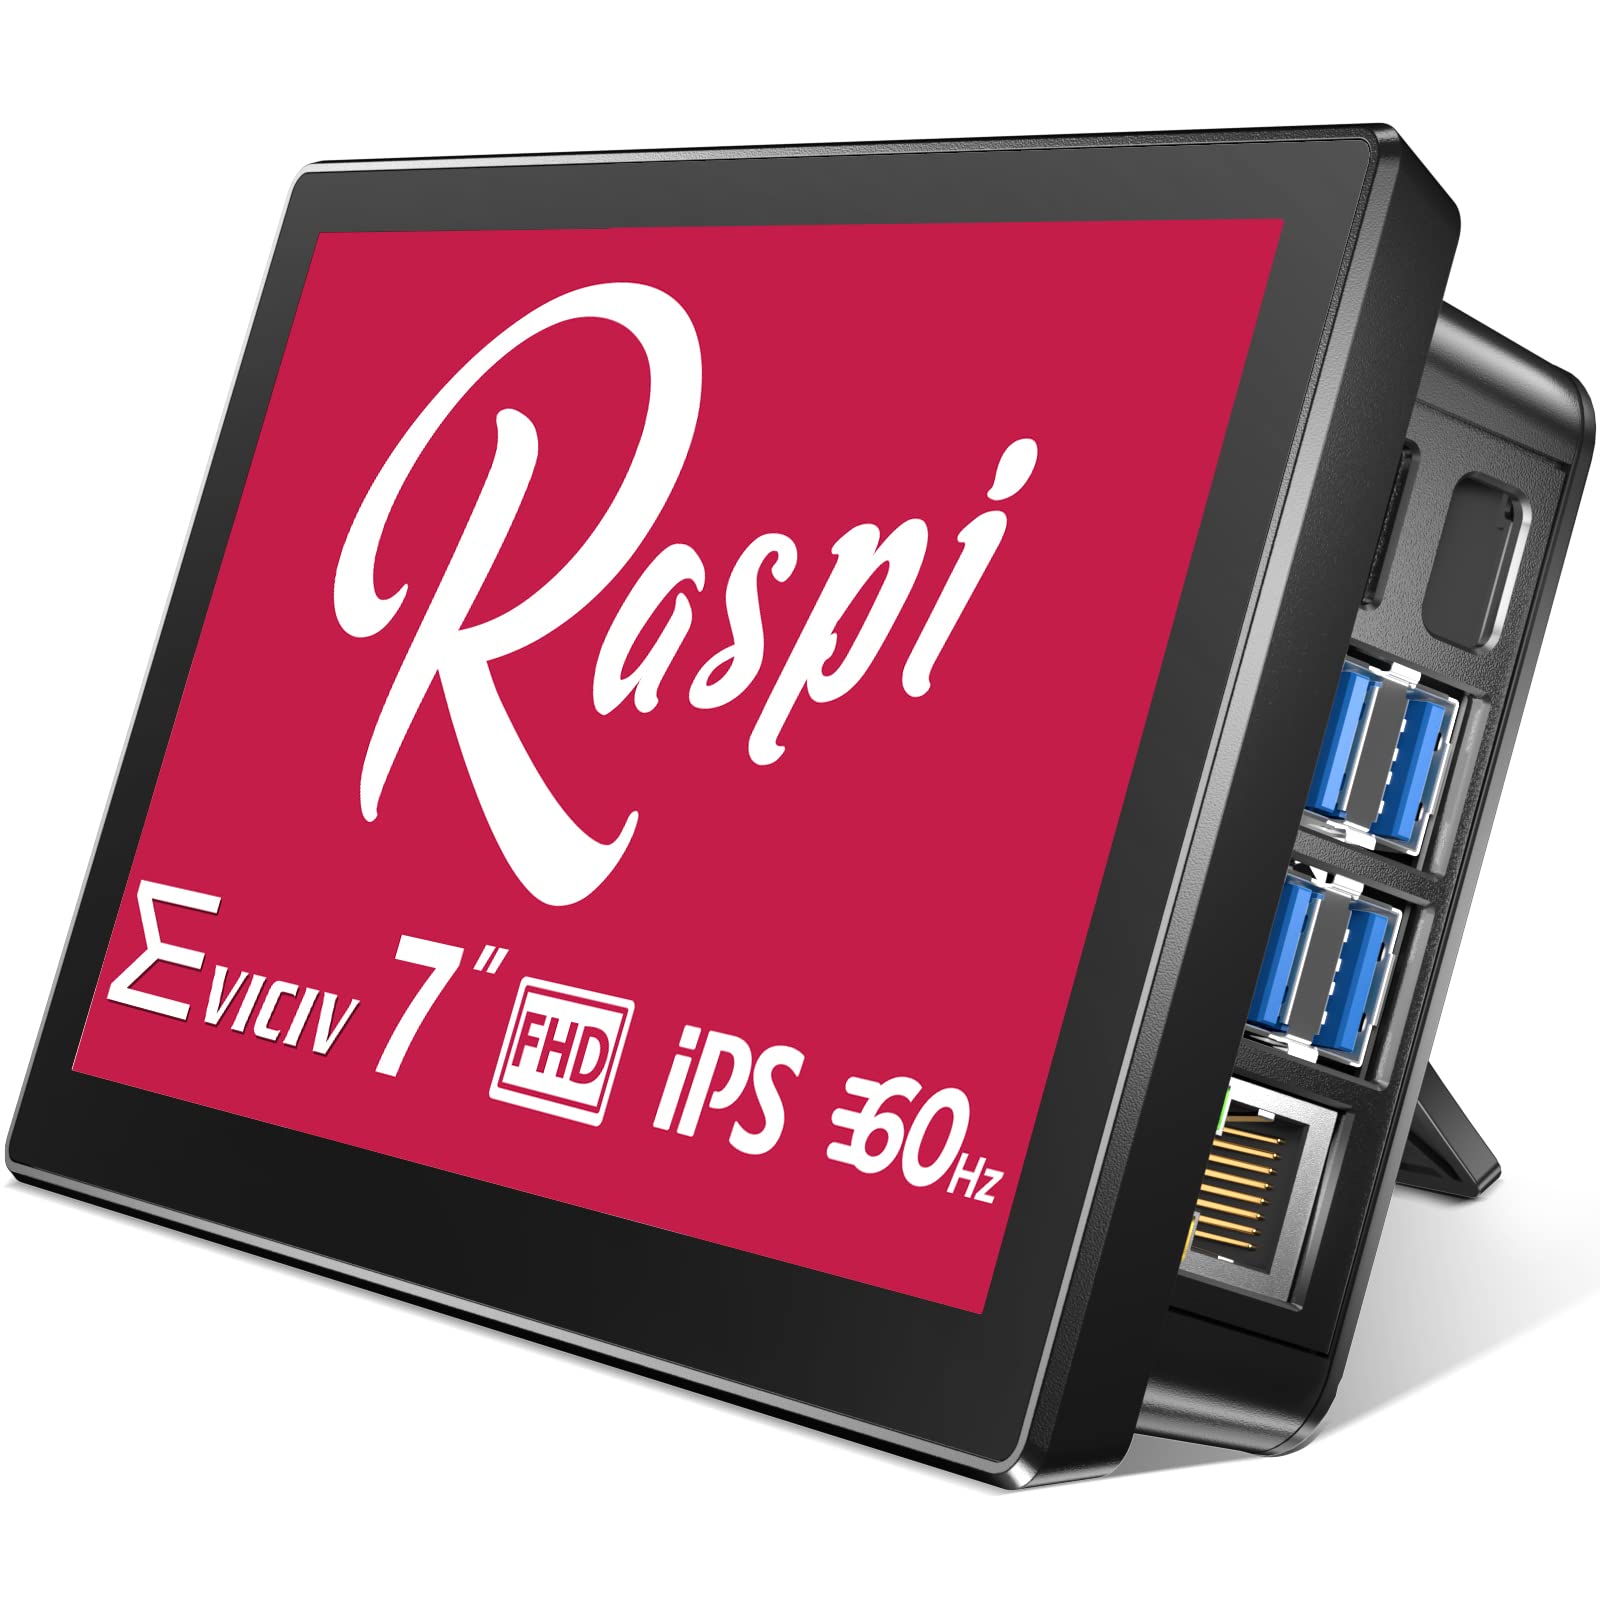 EVICIV Raspberry Pi 7 Inch Touchscreen Display Screen HDMI with Rear Housing -1024x600 Support, Type-C, IPS 178°View Angle Monitor with Cooling Fan for Raspberry Pi 4B, 3B, Banana Pi, Windows 10 8 7